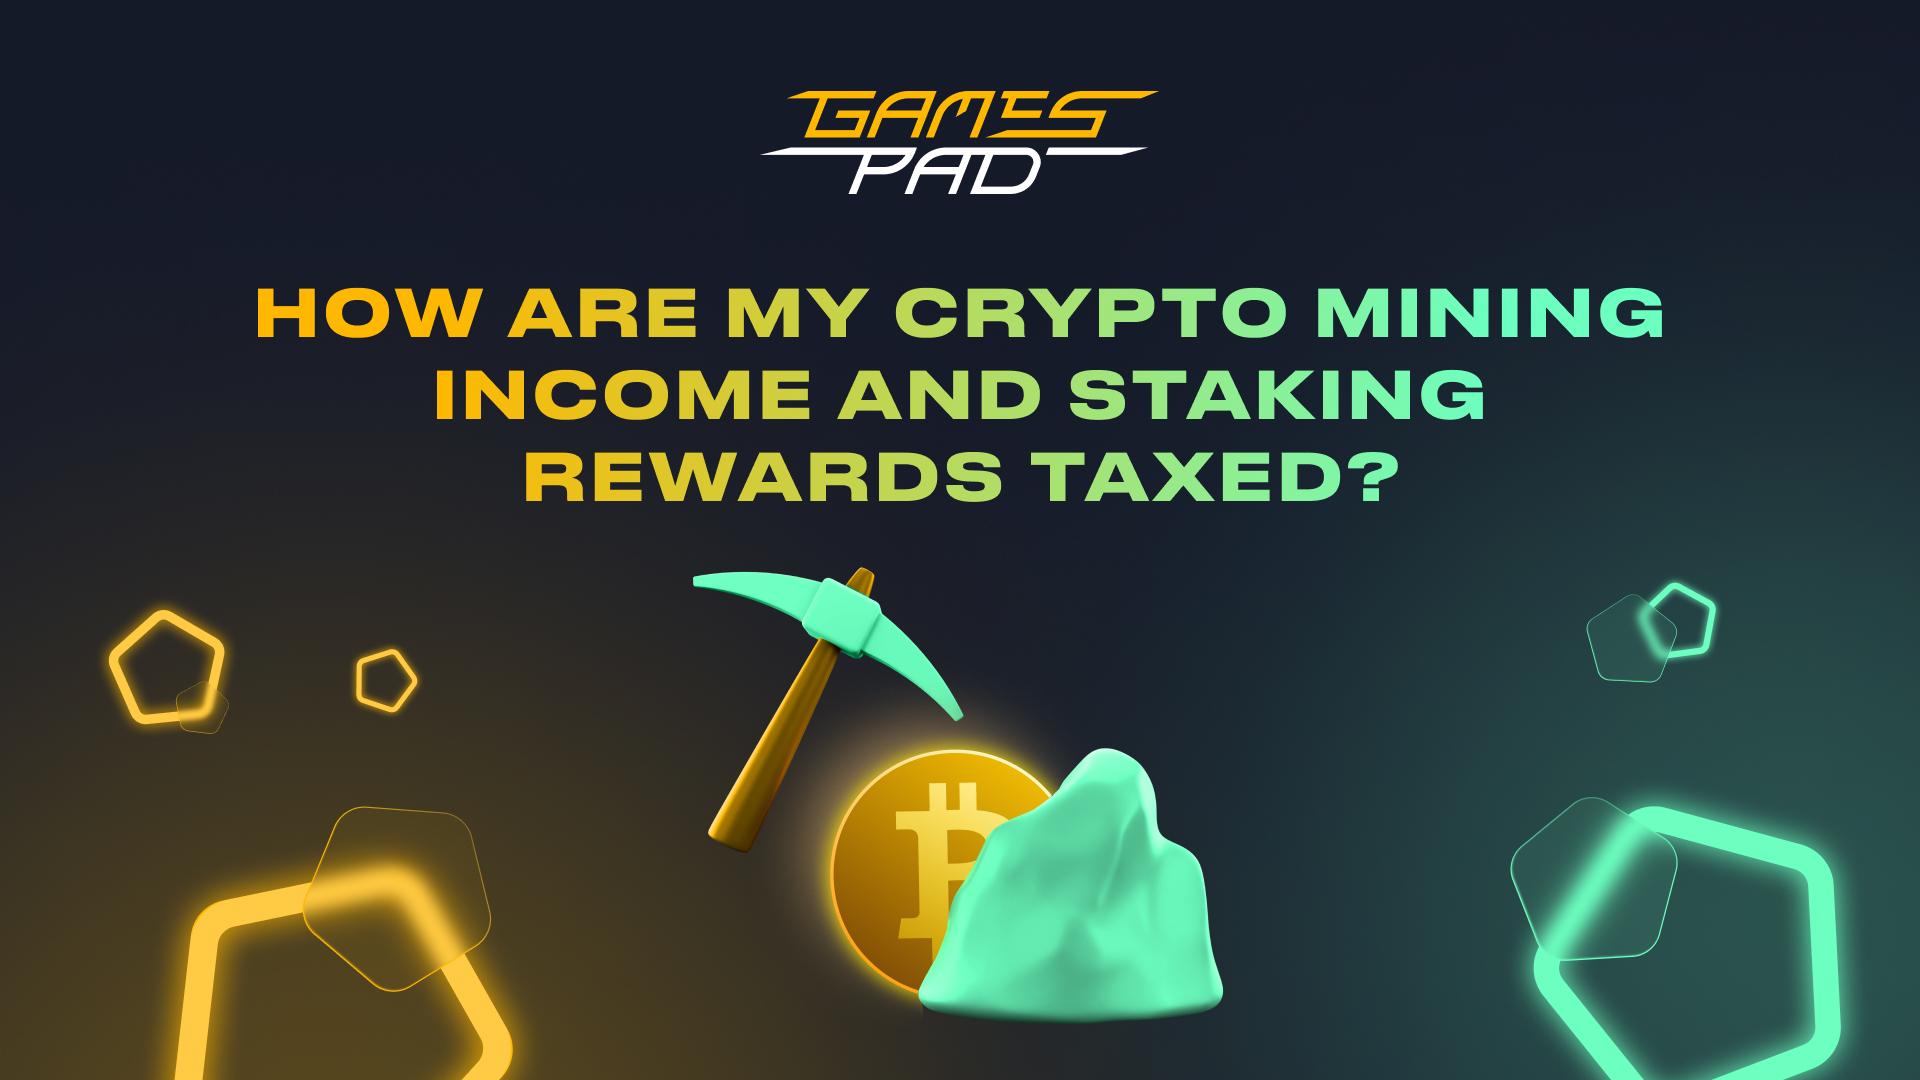 How Are My Crypto Mining Income And Staking Rewards Taxed?